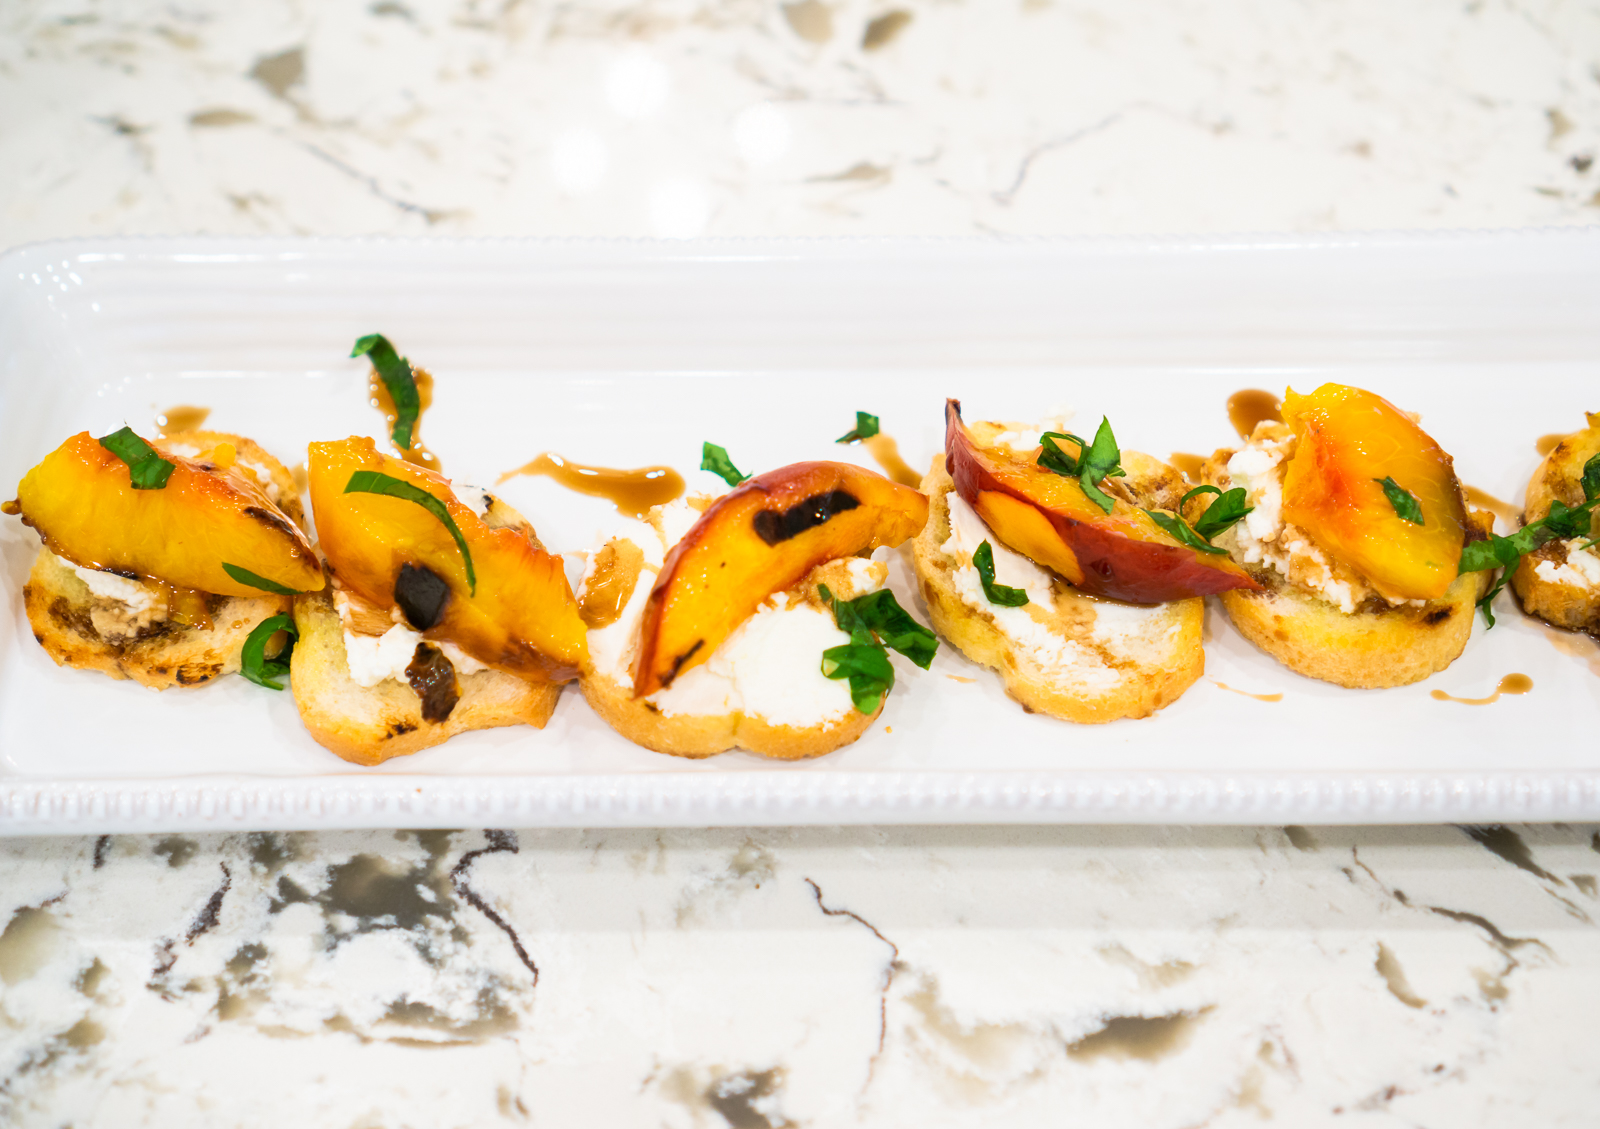 GRILLED NECTARINE CROSTINIS WITH GOAT CHEESE AND BASIL